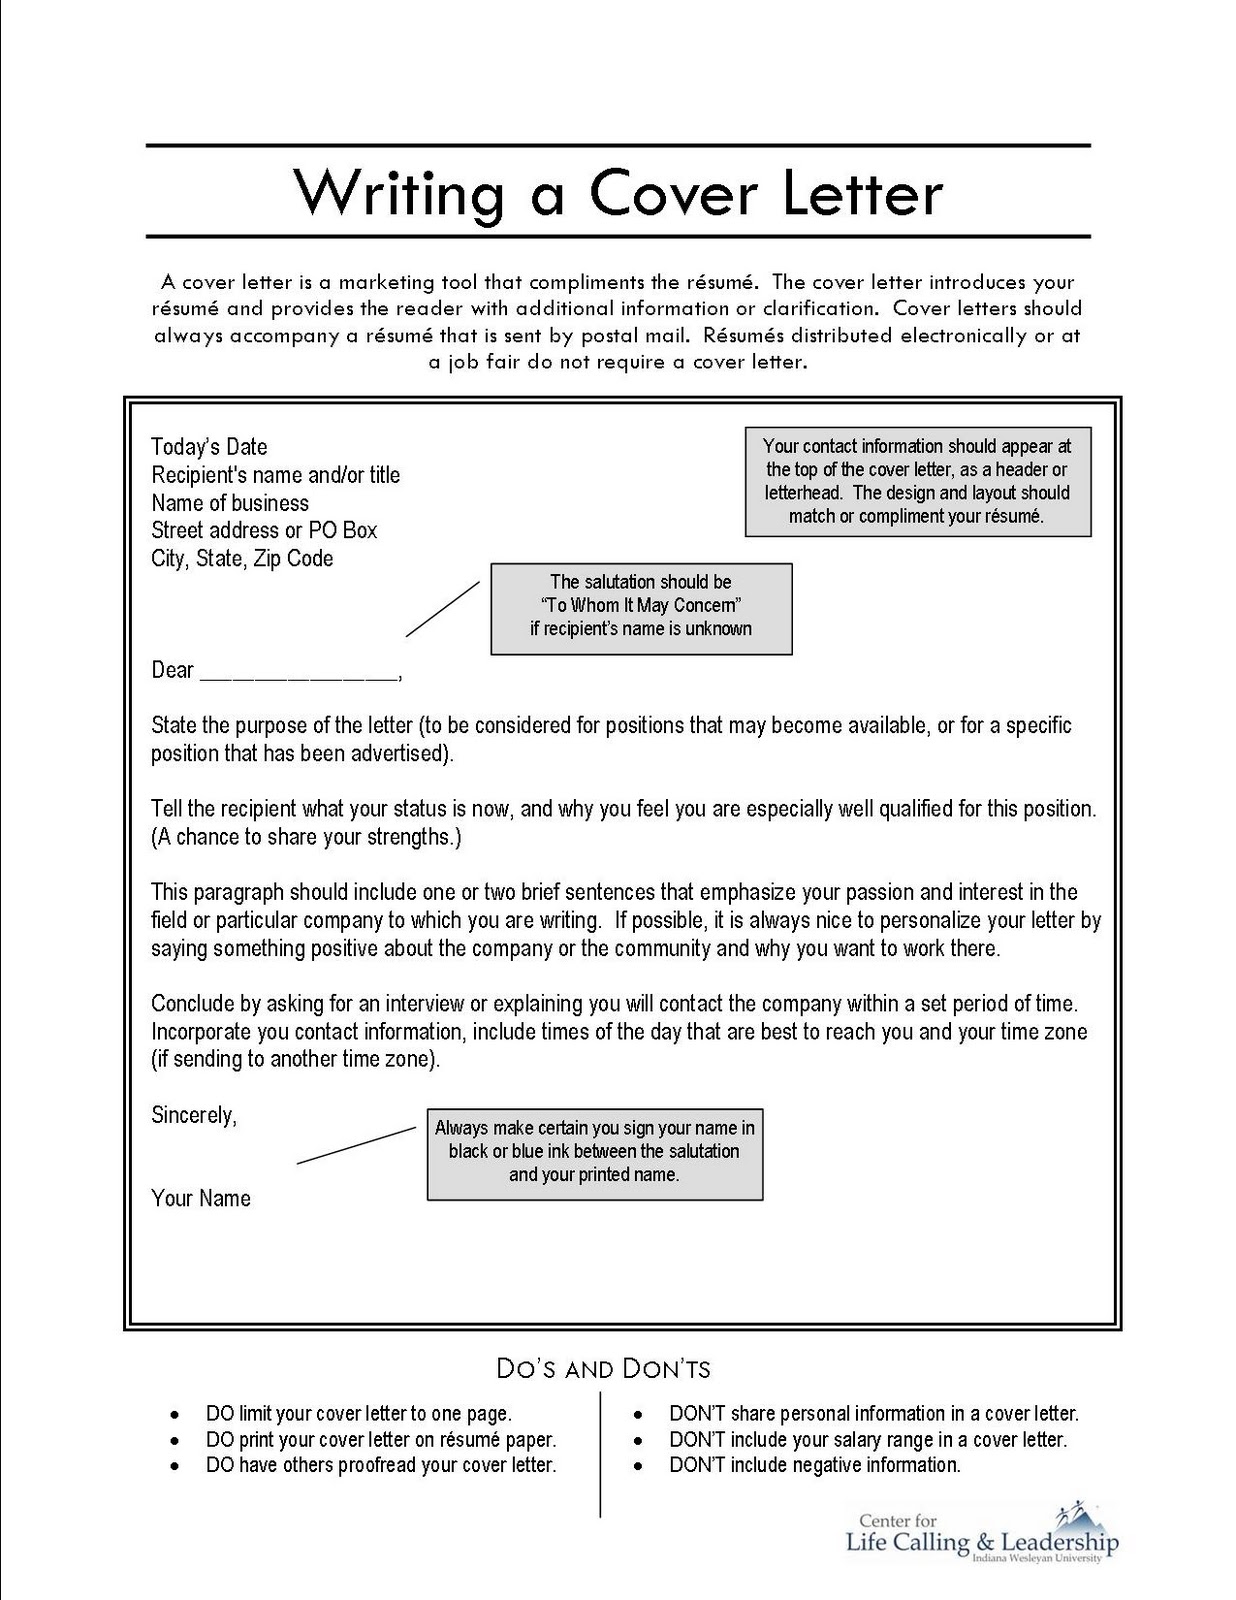 I need to have my resume and cover letter professionally written! ?